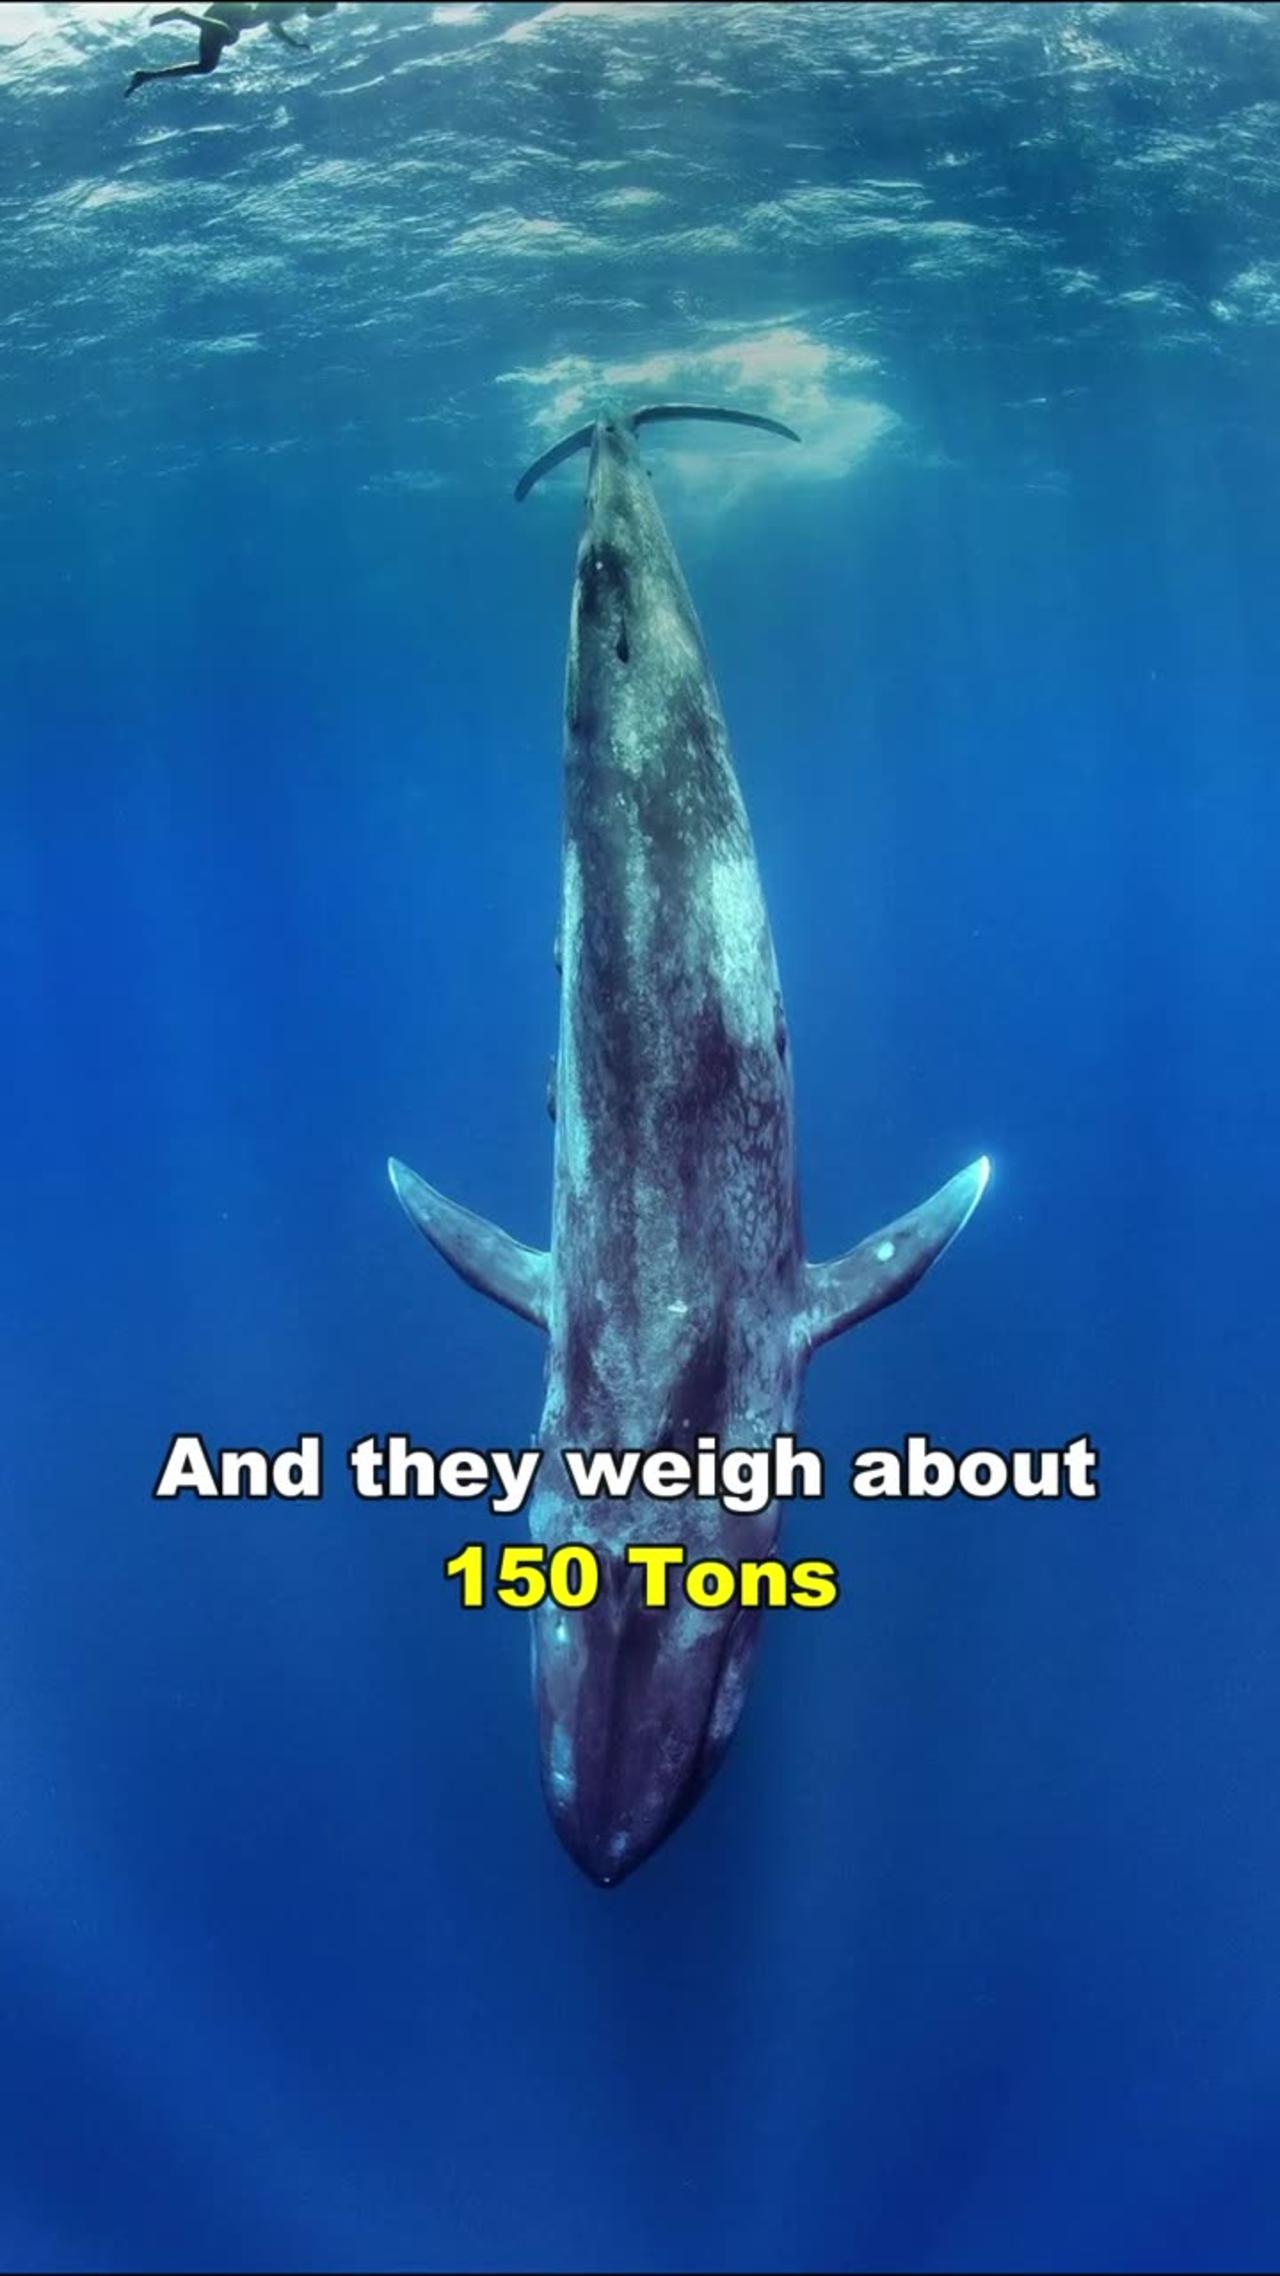 Blue Whale | The Largest Animal In The World